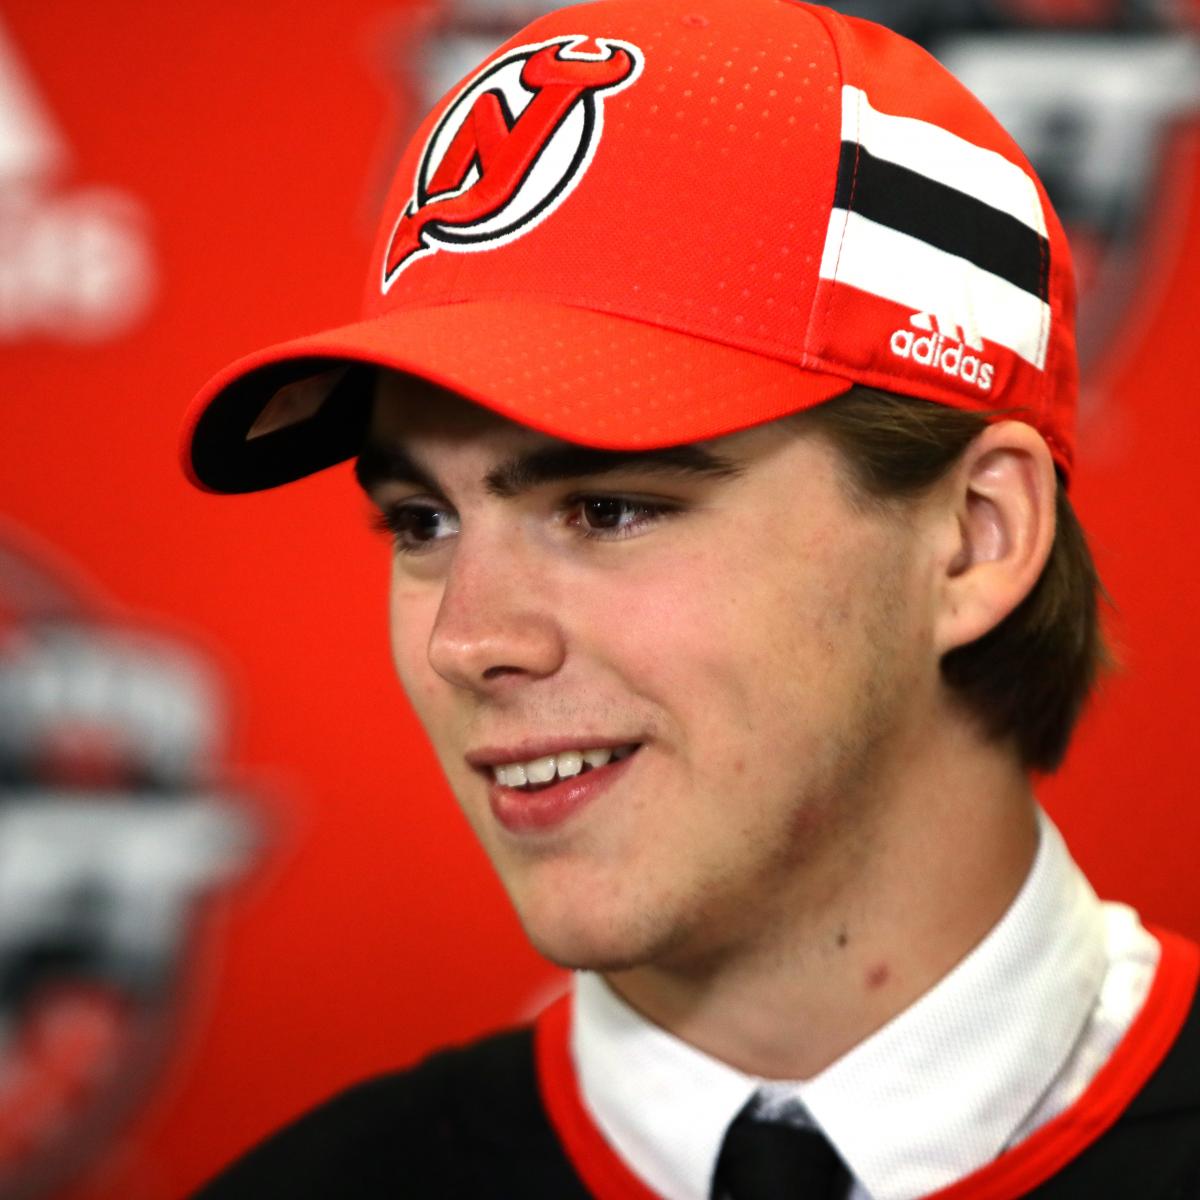 Breitling Watch Company Signs National Hockey League Player Nico Hischier -  Bob's Watches